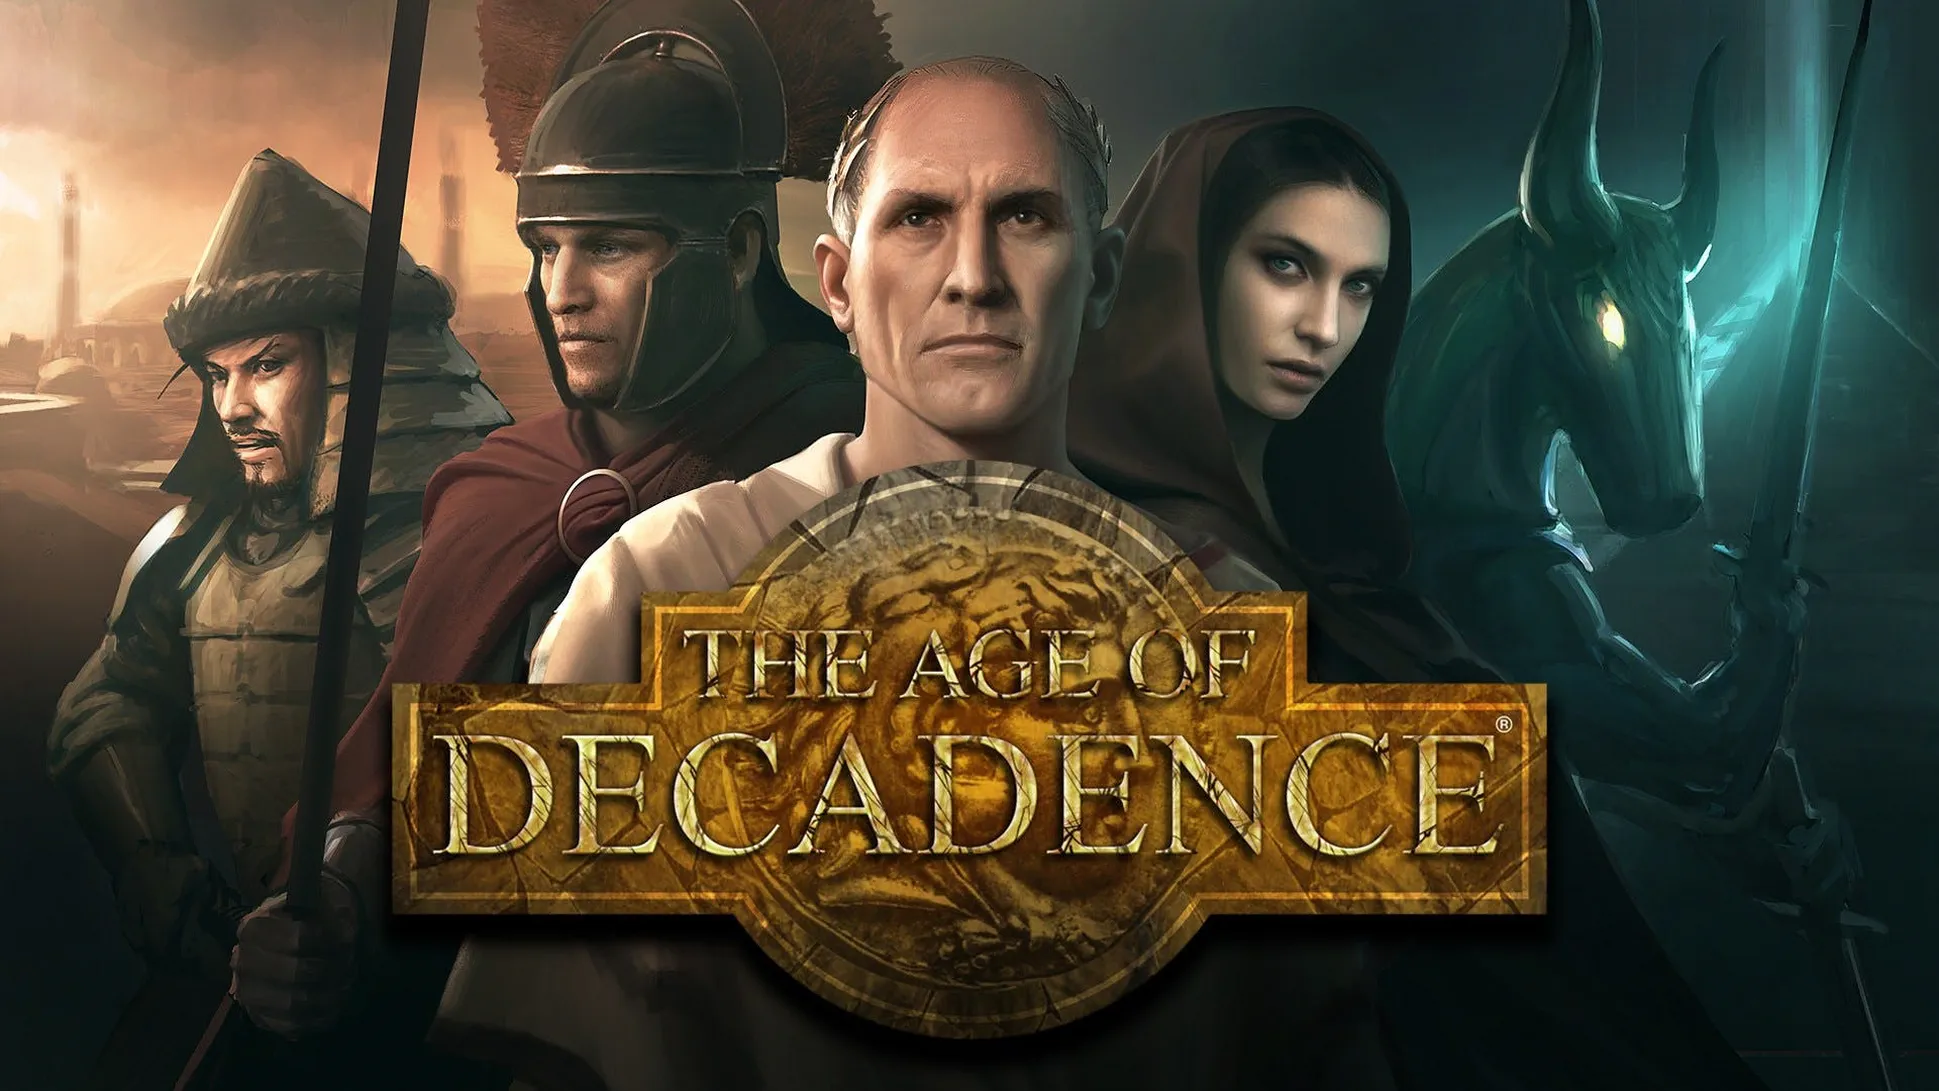 The Age of Decadence (2015).